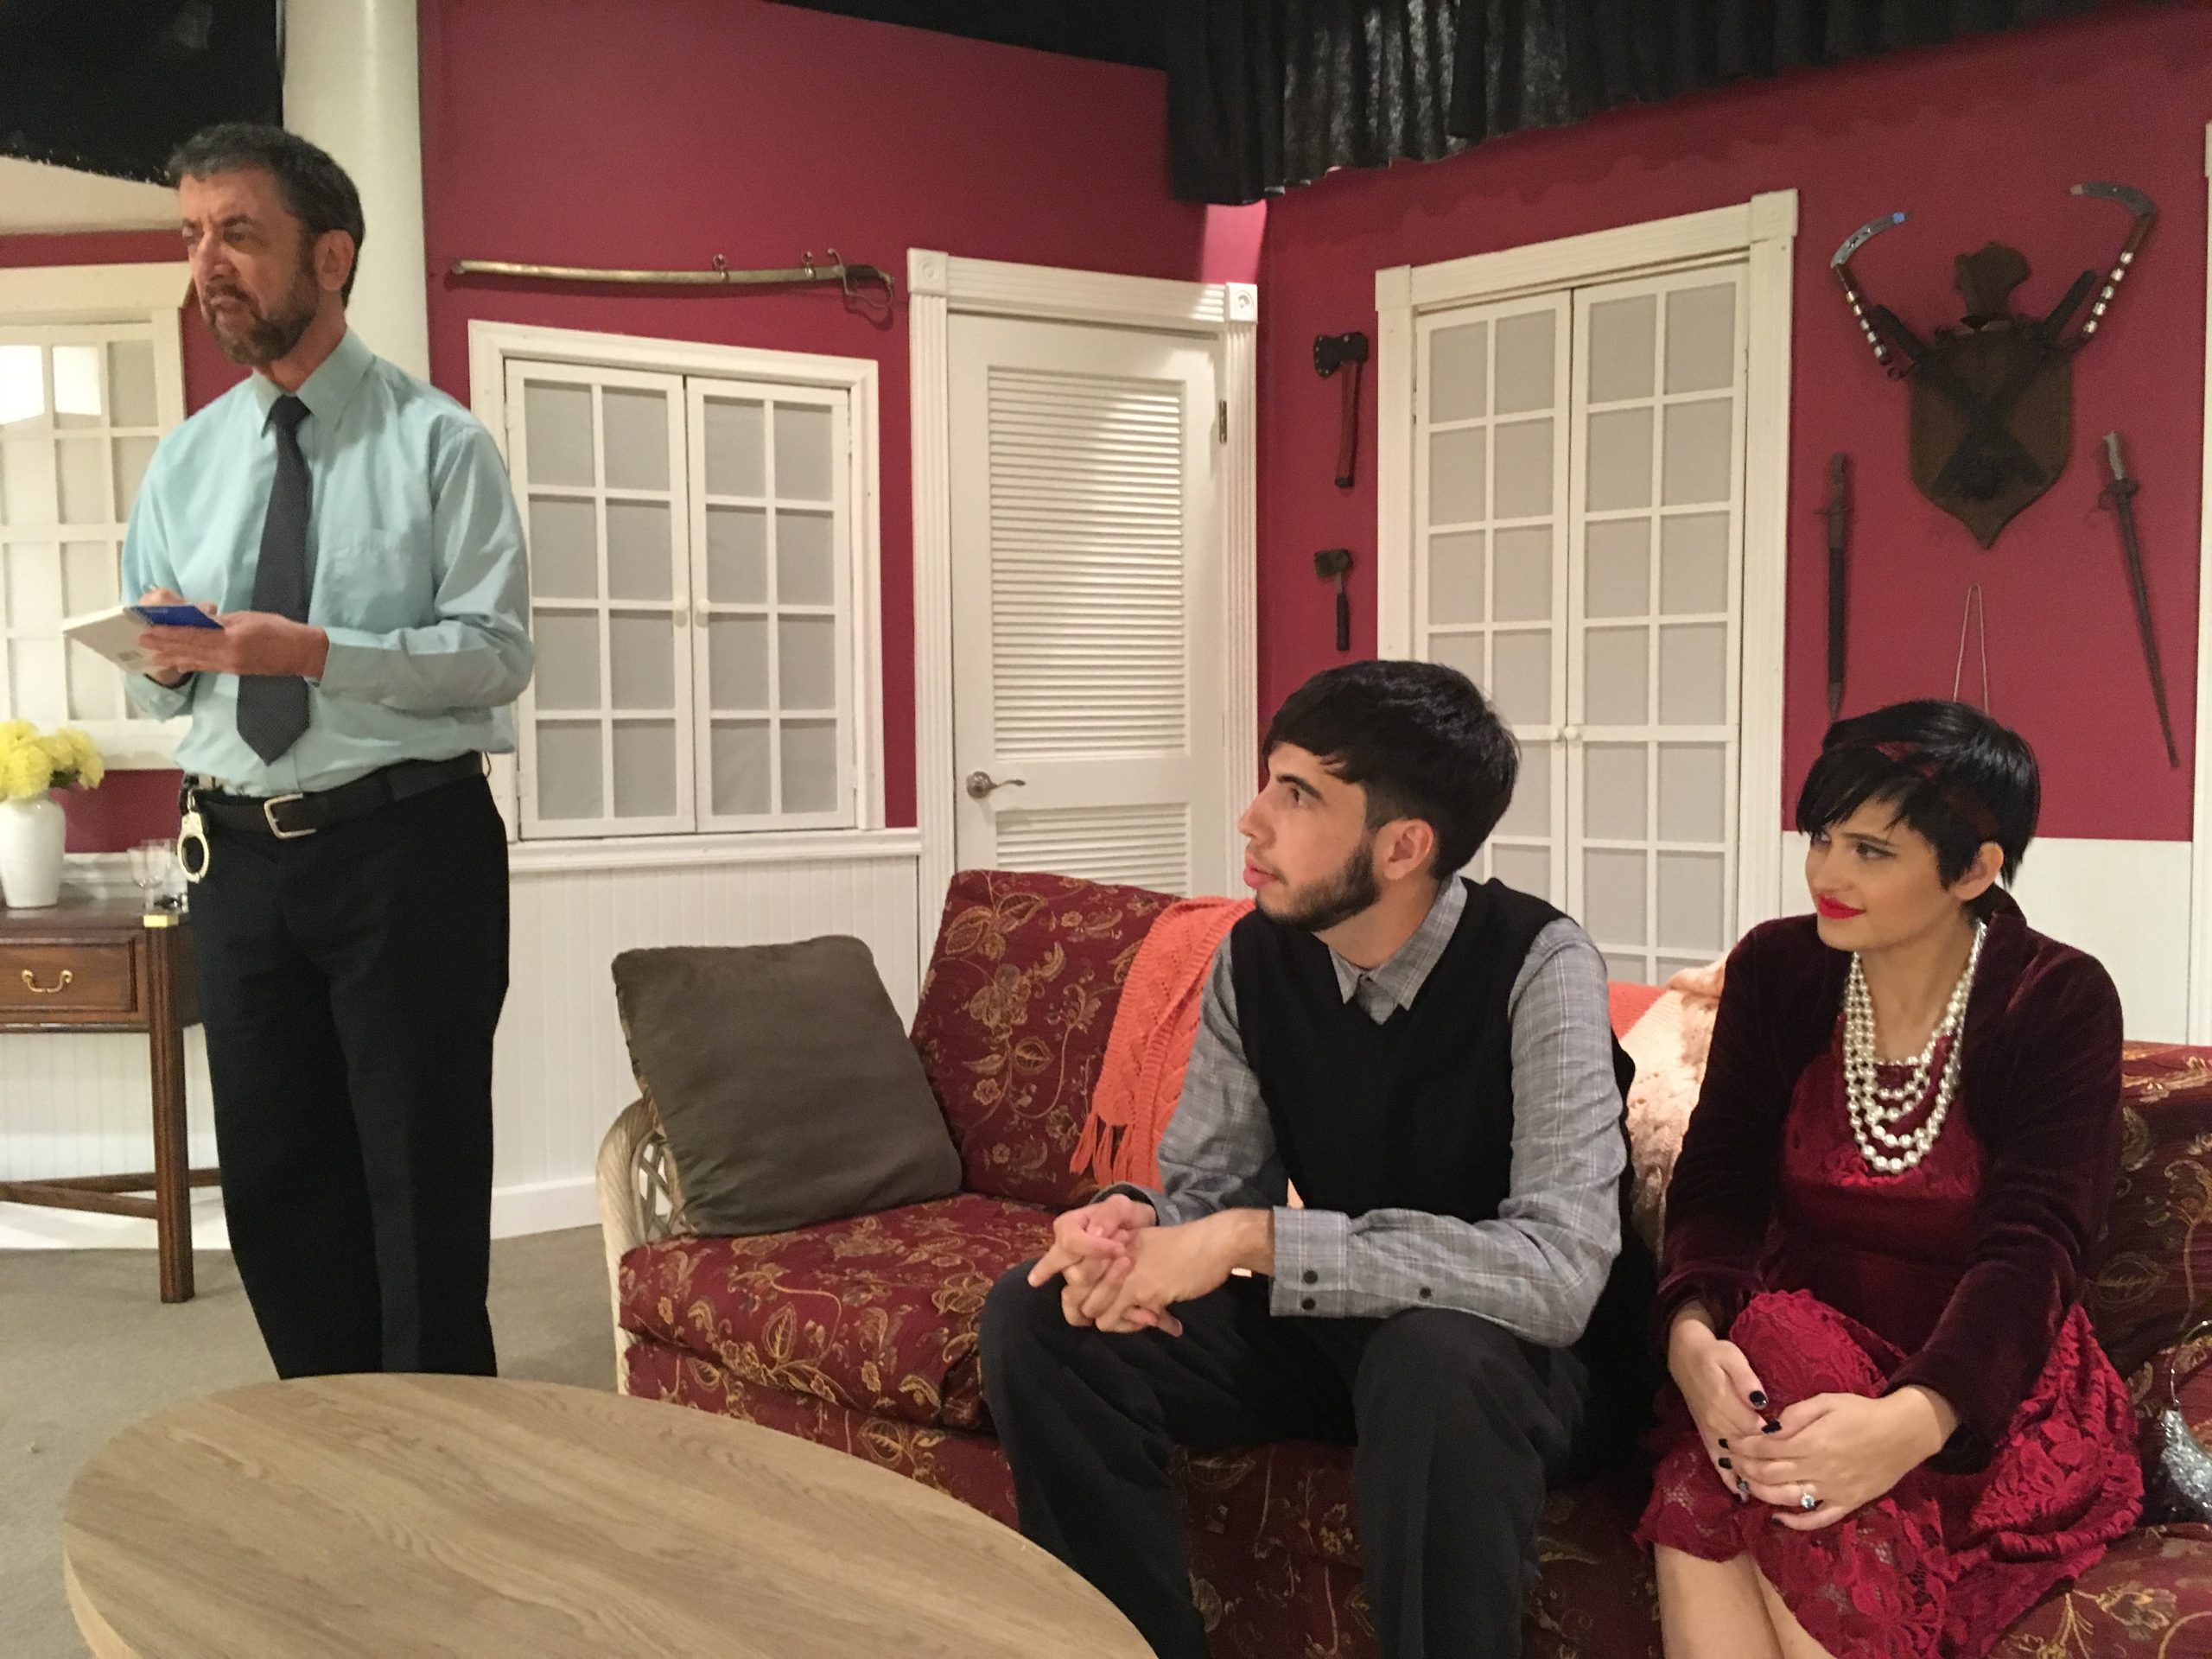 A male actor stands, holding a notebook while a male and female actor sit on the couch watching him.